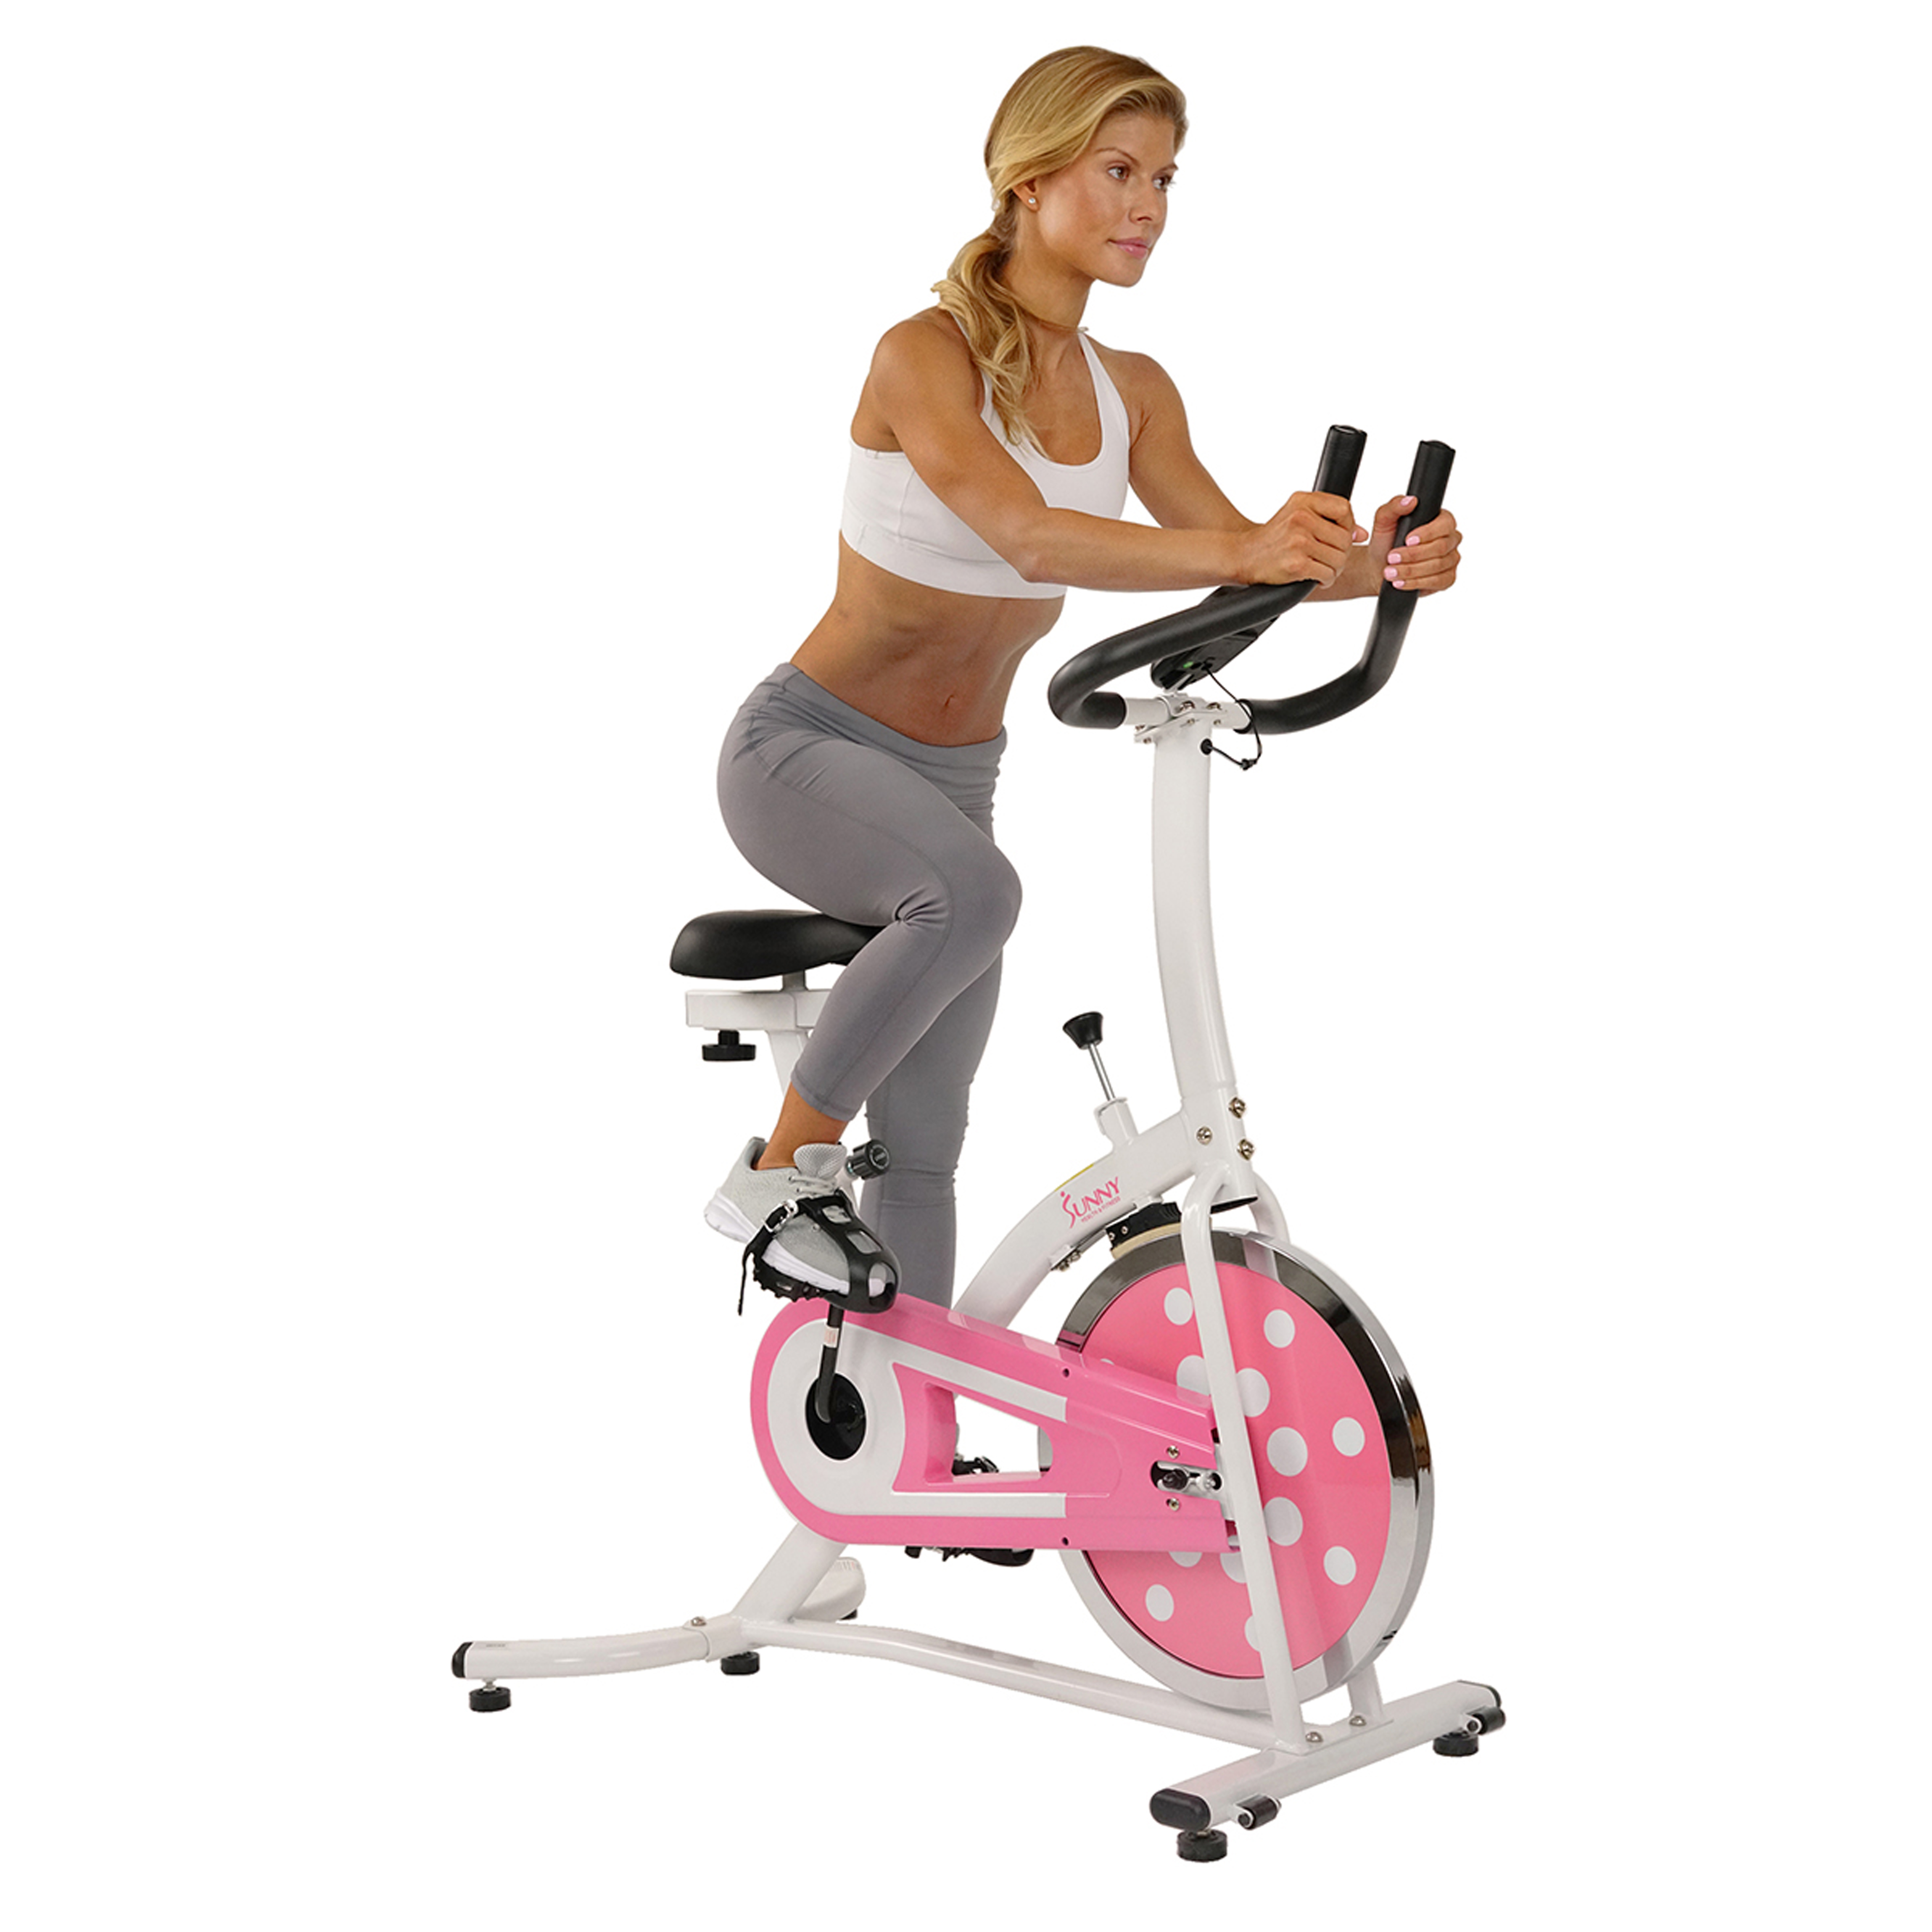 Sunny Health & Fitness Pink Chain Drive Indoor Cycling Exercise Stationary Bike w/ Monitor for Home Workout, Sport Training P8100 - image 1 of 8